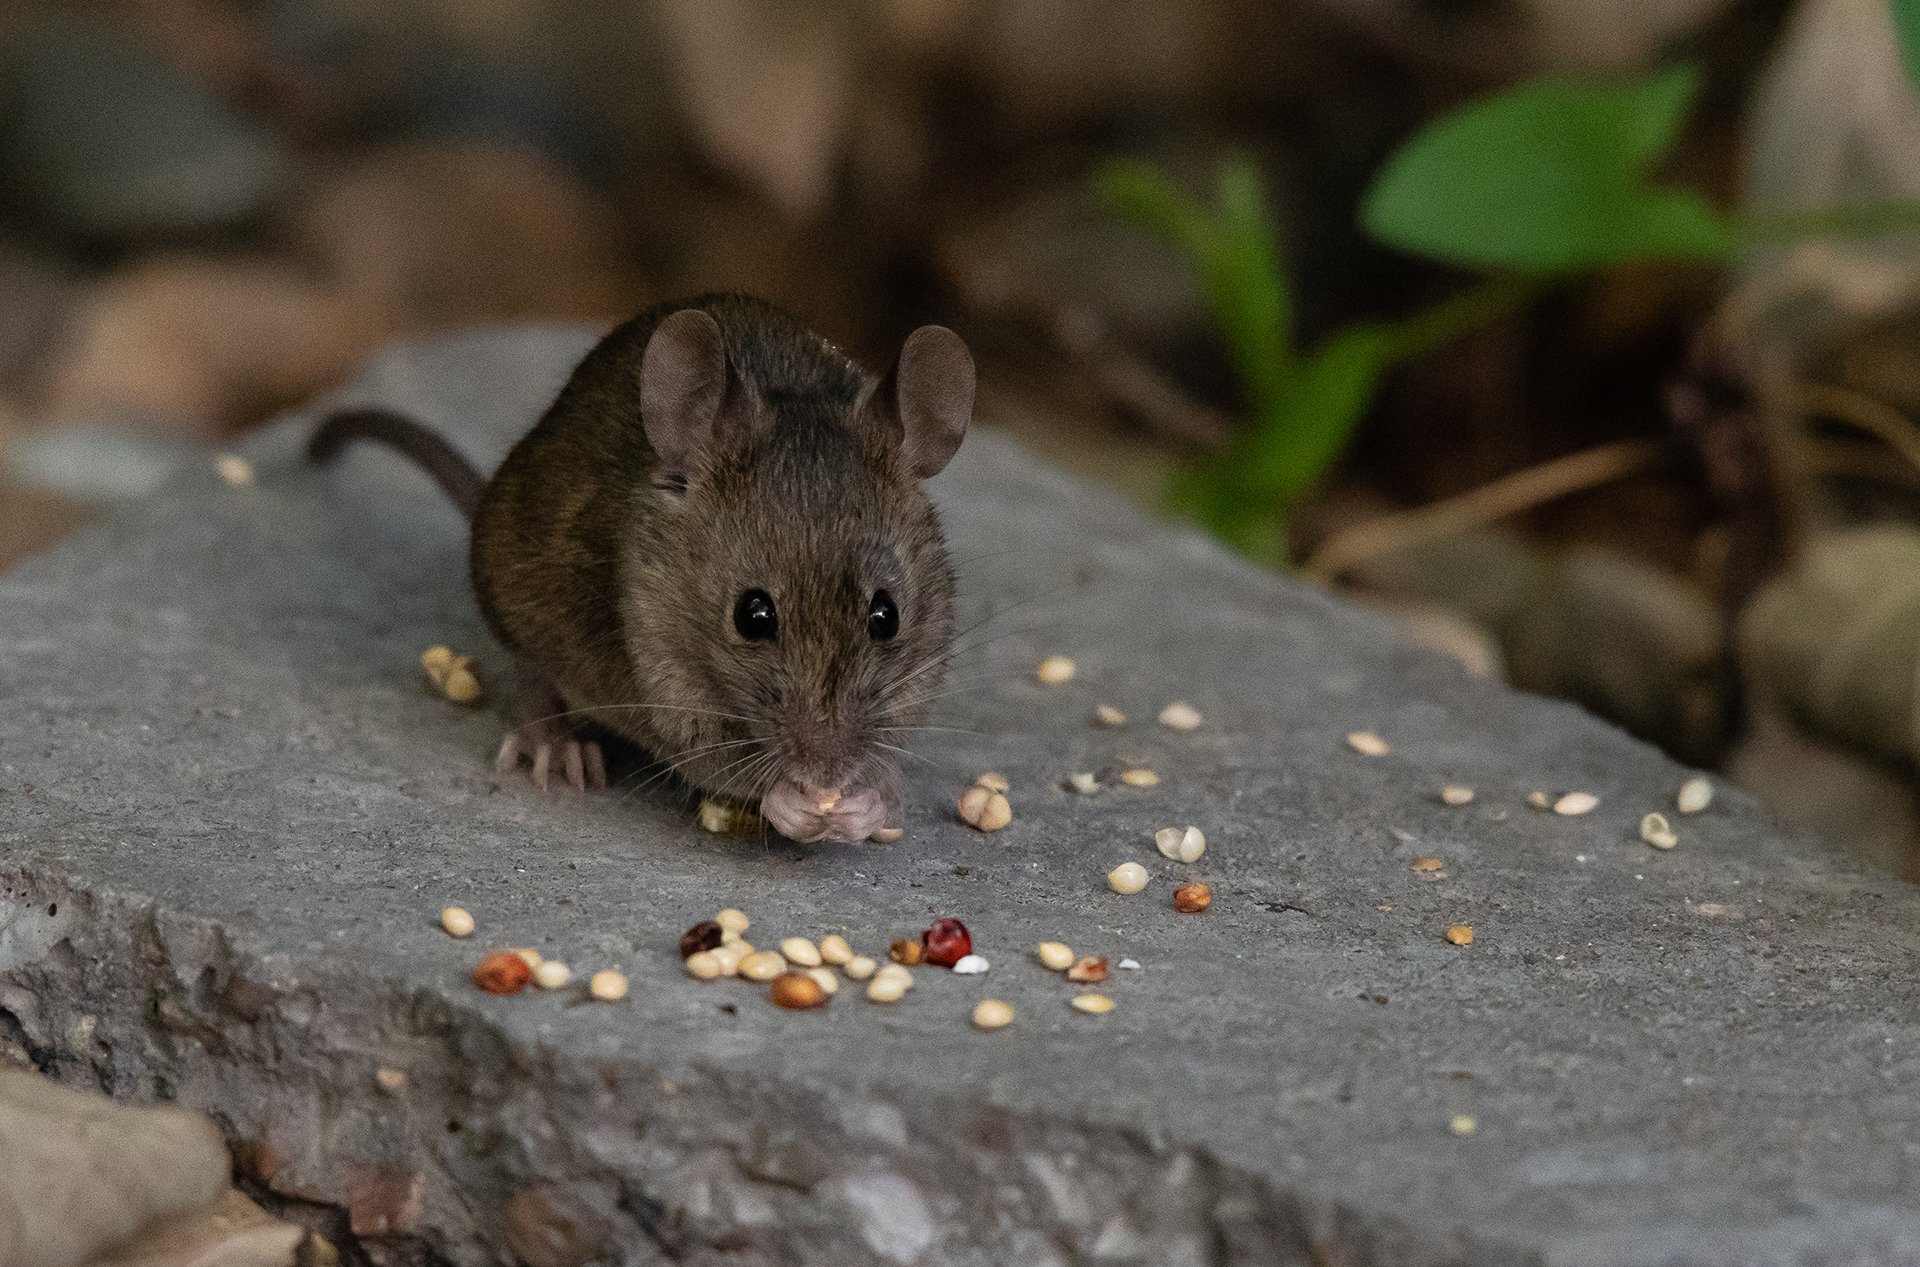 What can I feed a wild mouse?